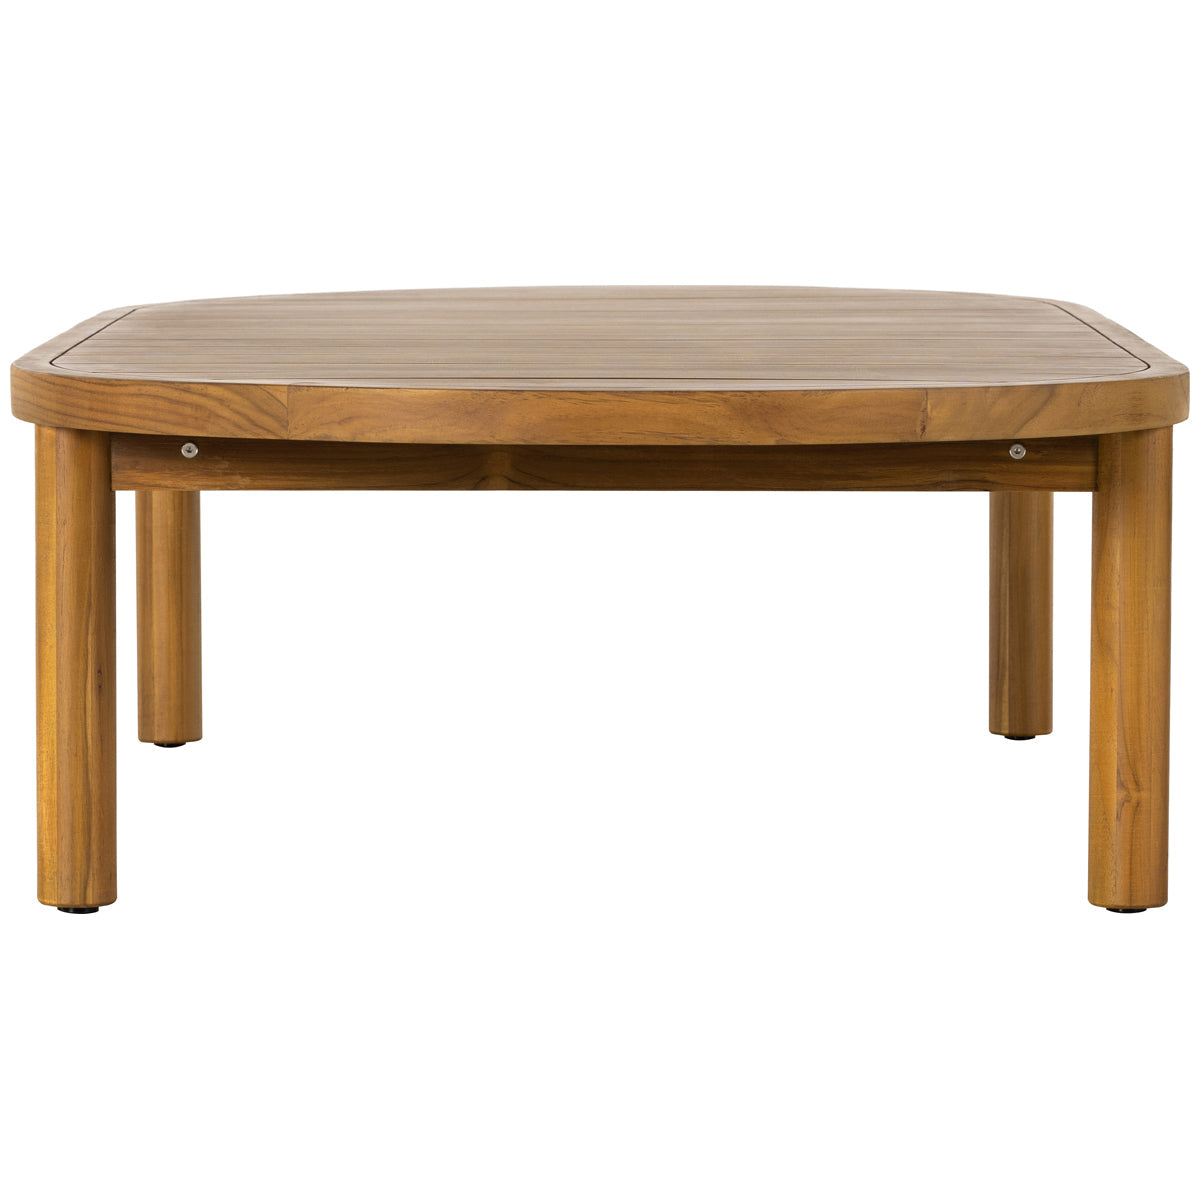 Four Hands Pembrook Messina 96-Inch Outdoor Coffee Table - Natural